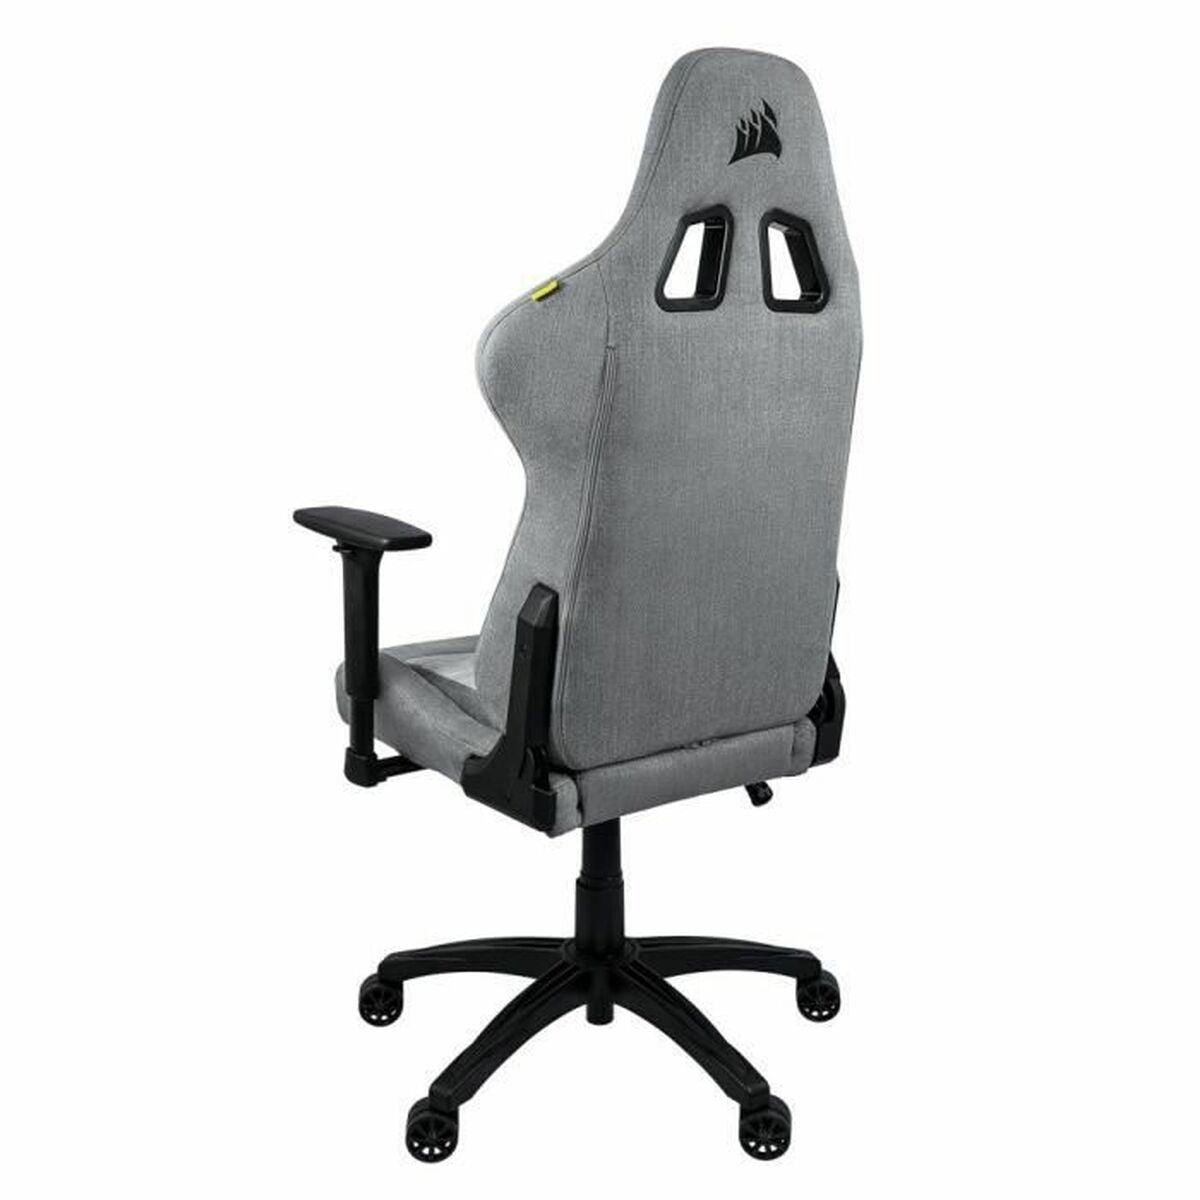 Gaming Chair Corsair TC100 RELAXED (Refurbished A)